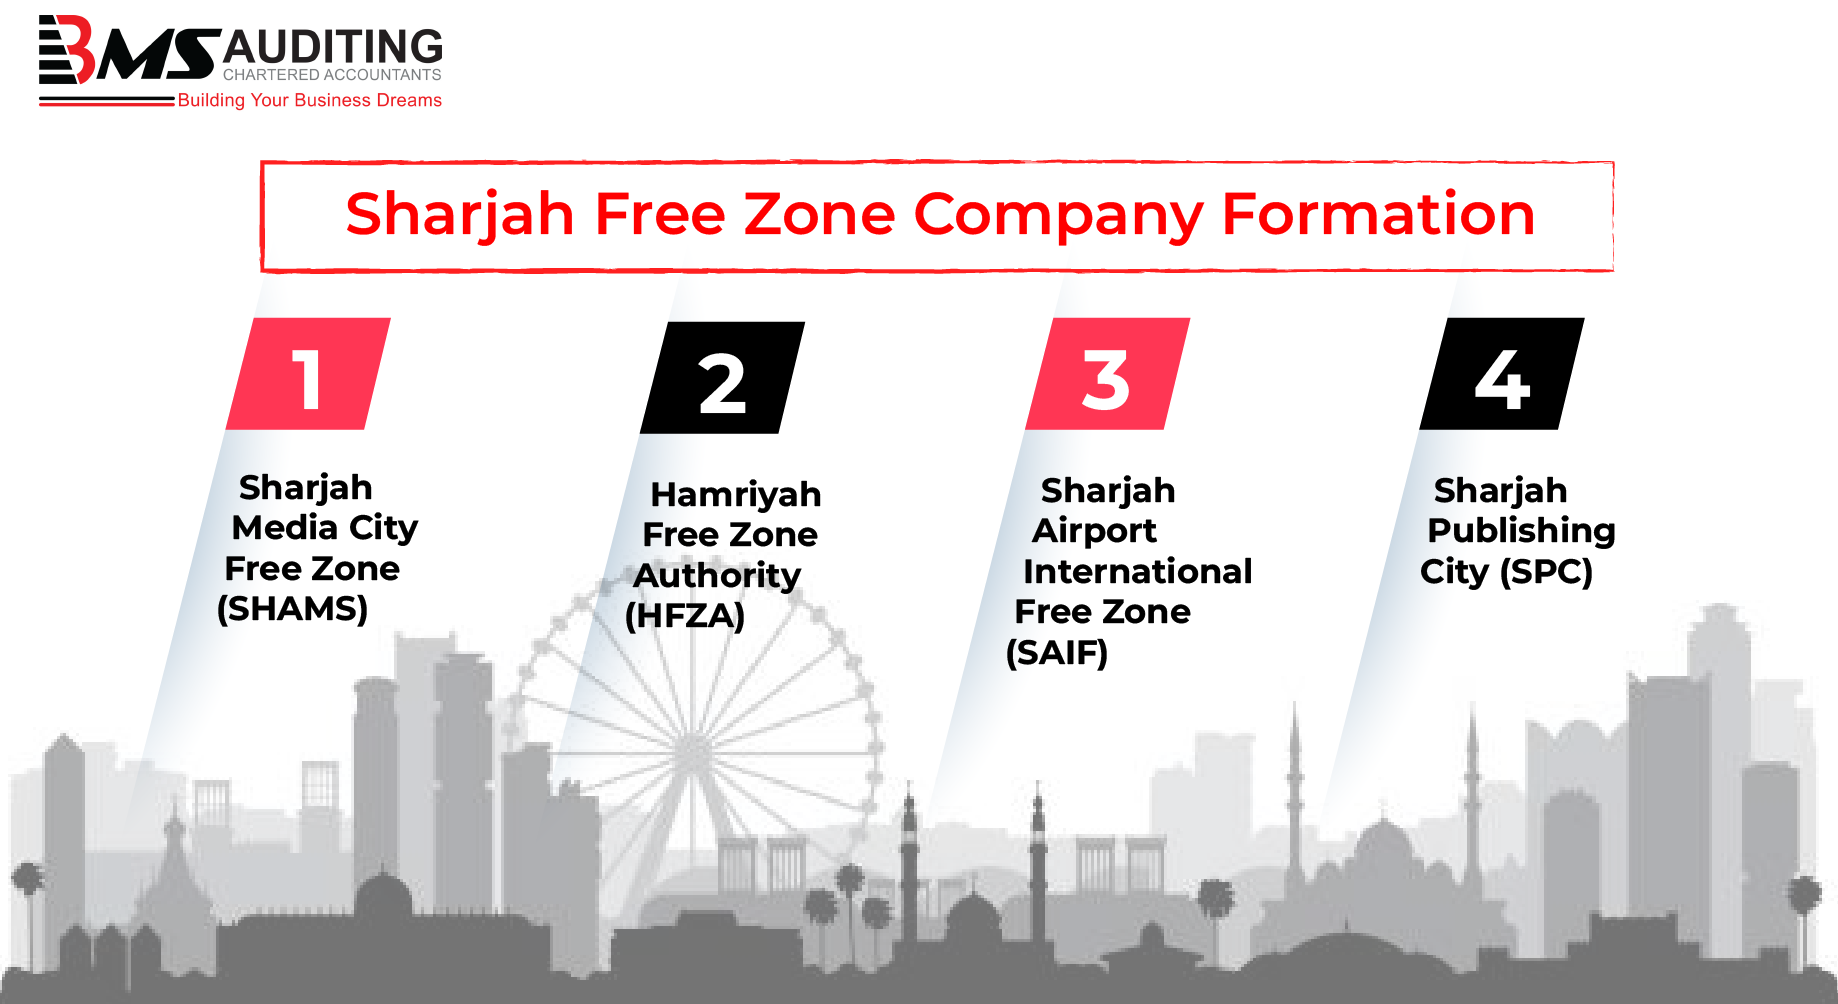 image listing out the Sharjah free zones in UAE that are apt for company formation 